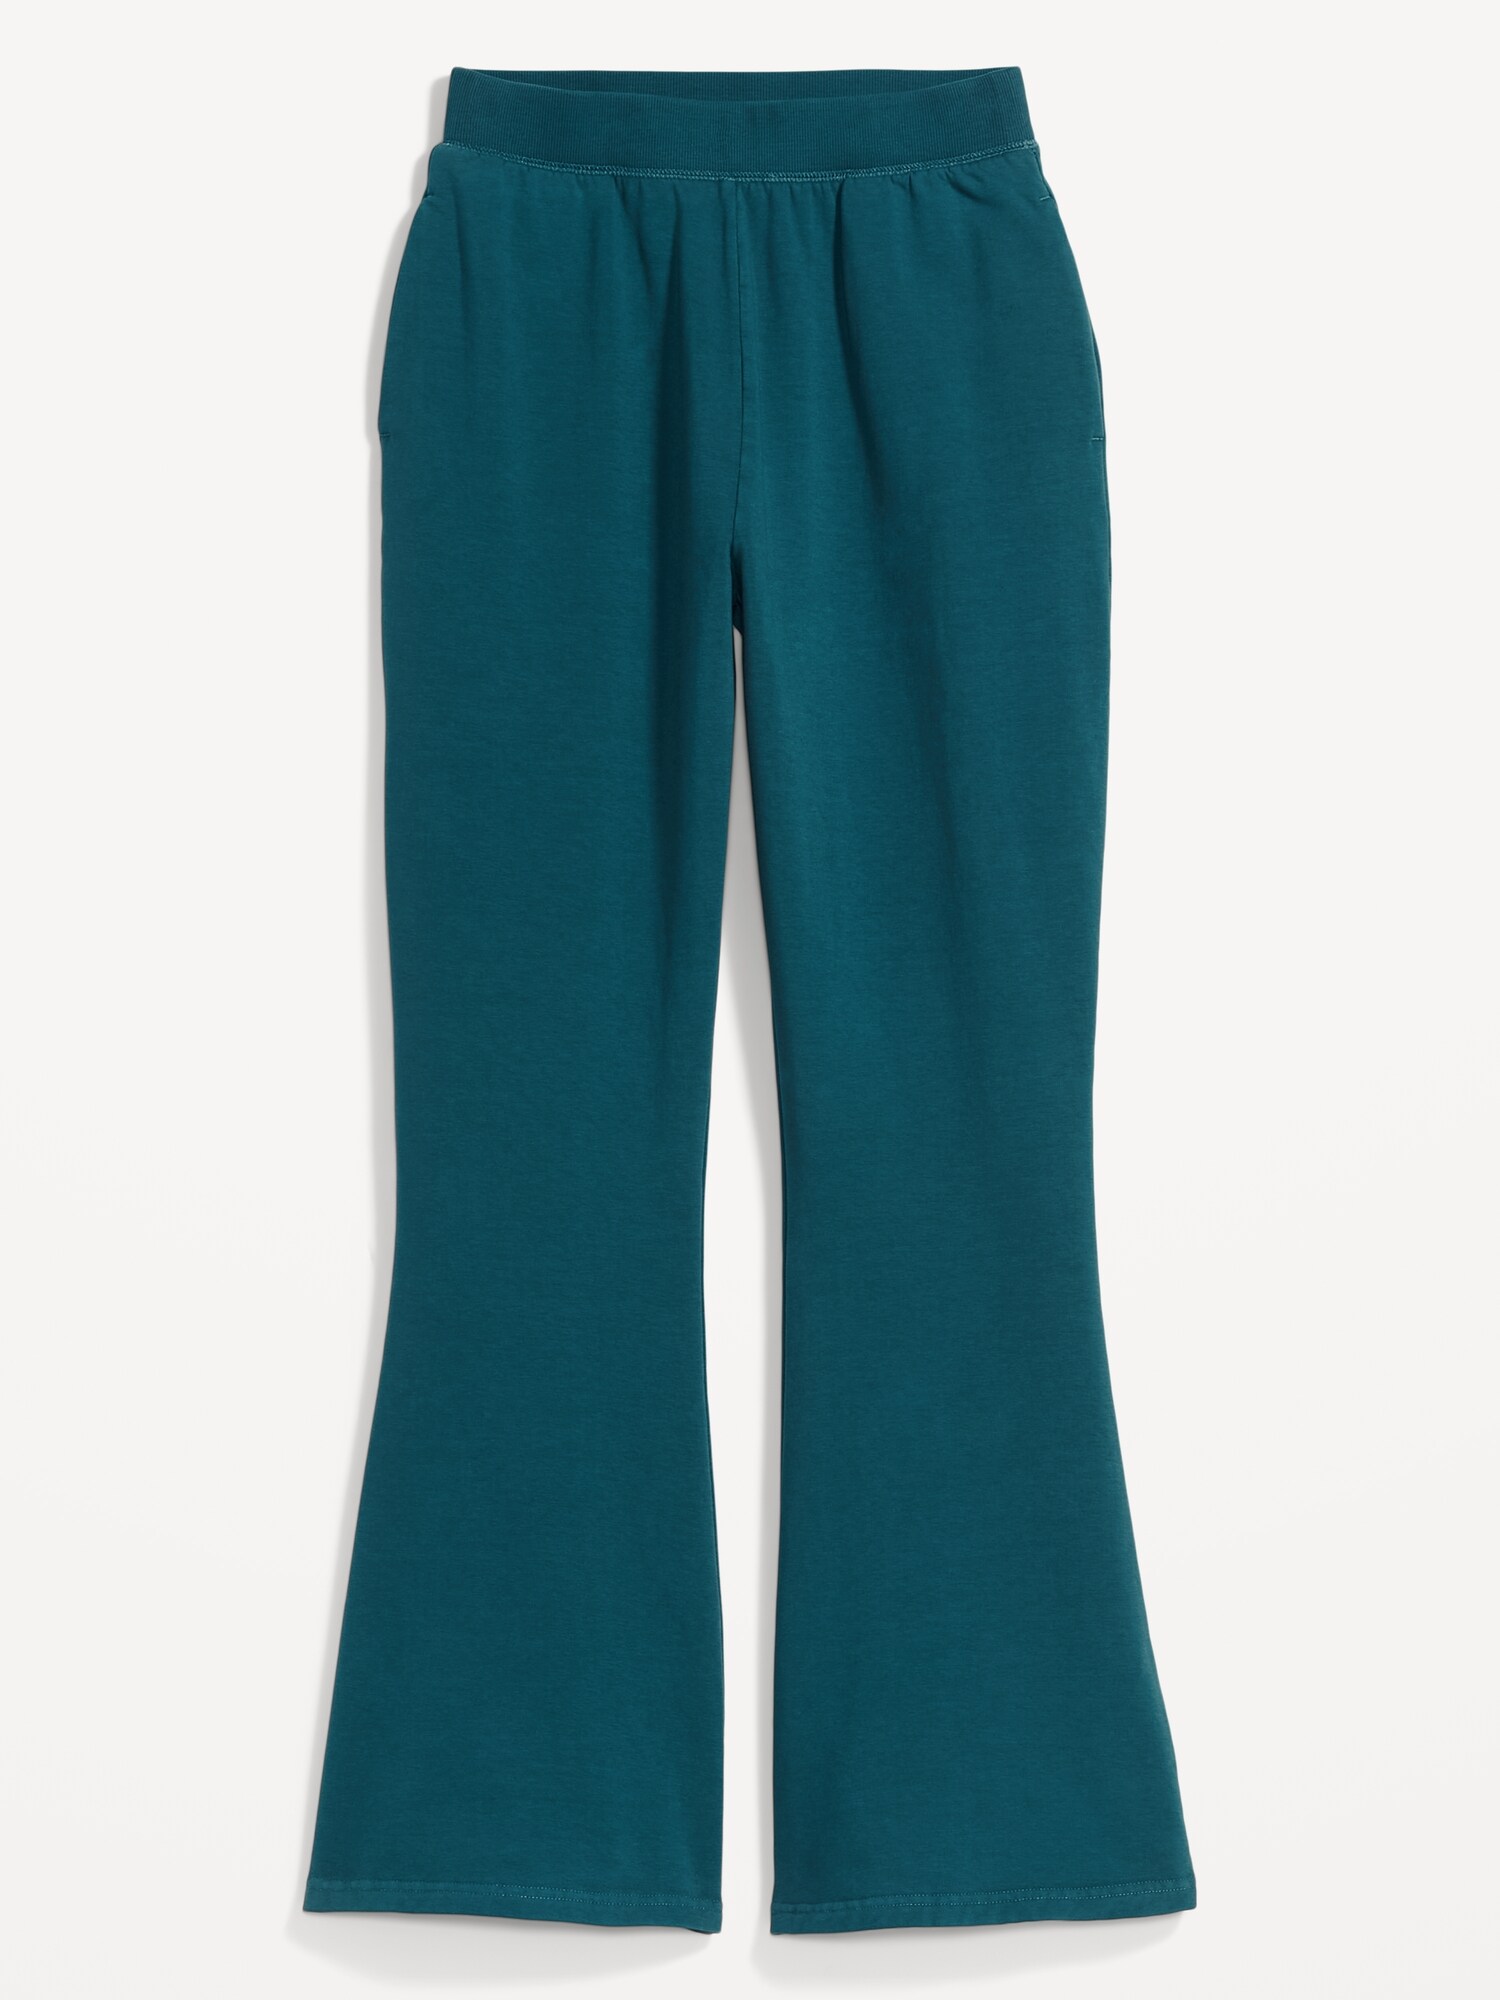 Old Navy Extra High-Waisted Flare Sweatpants for Women